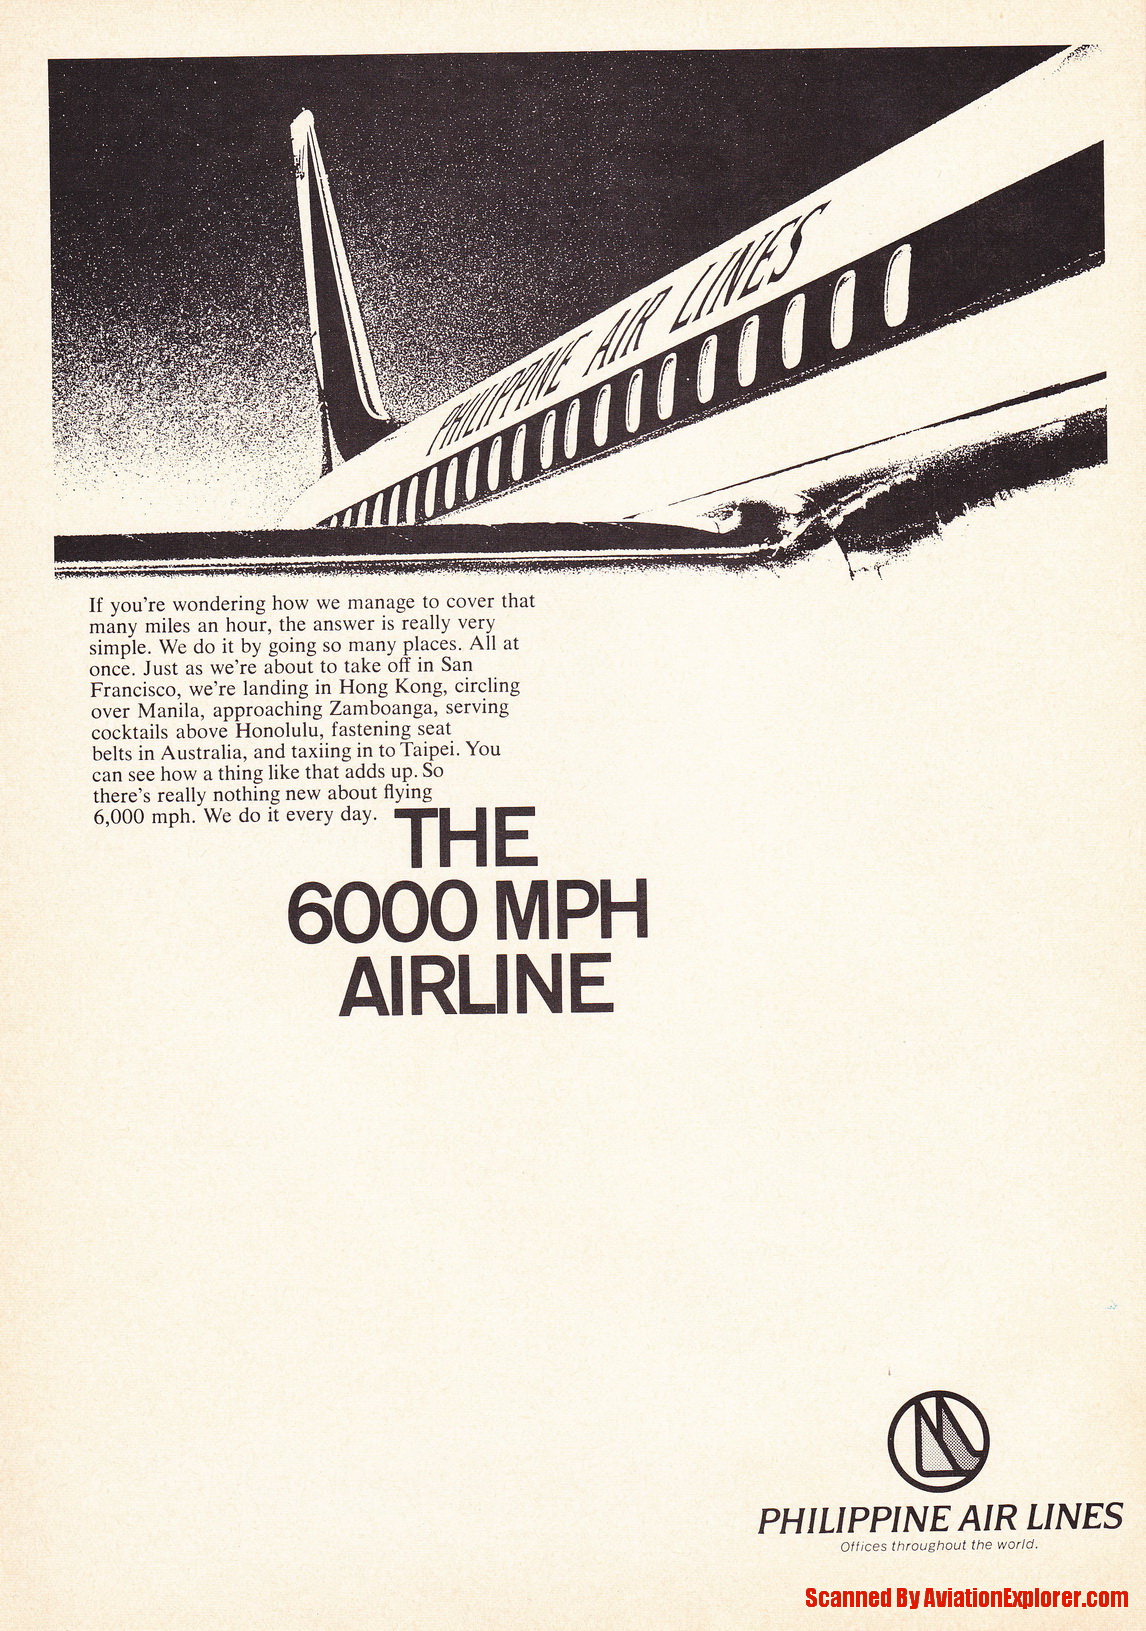 Vintage Airline Aviation and Aerospace Ads - Mohawk Airlines 